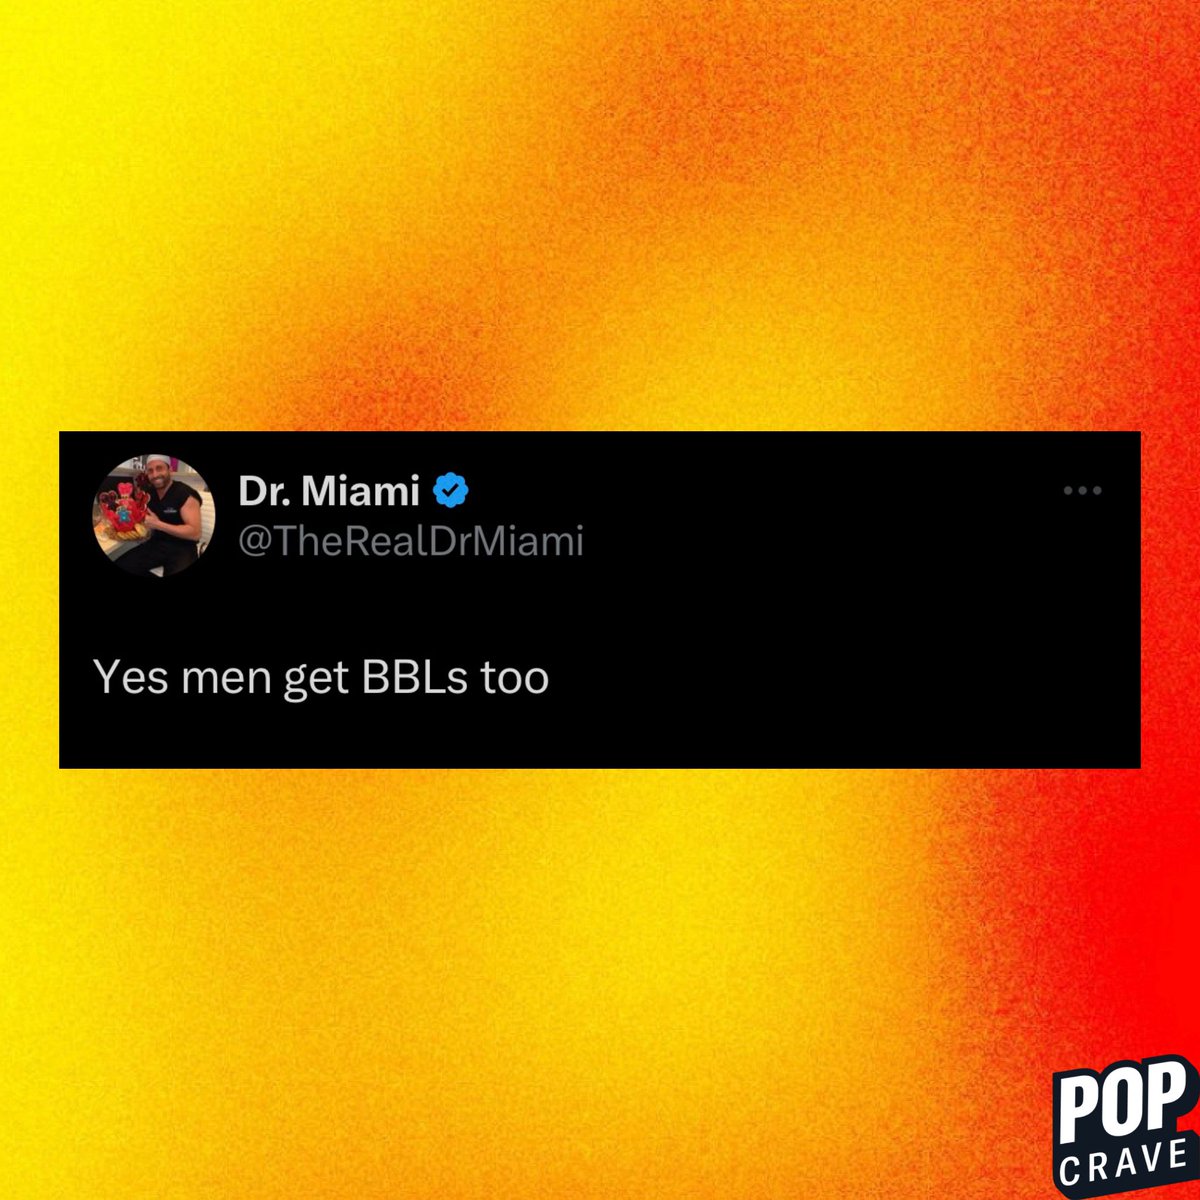 Dr. Miami shares new tweet: “Yes men get BBLs too”